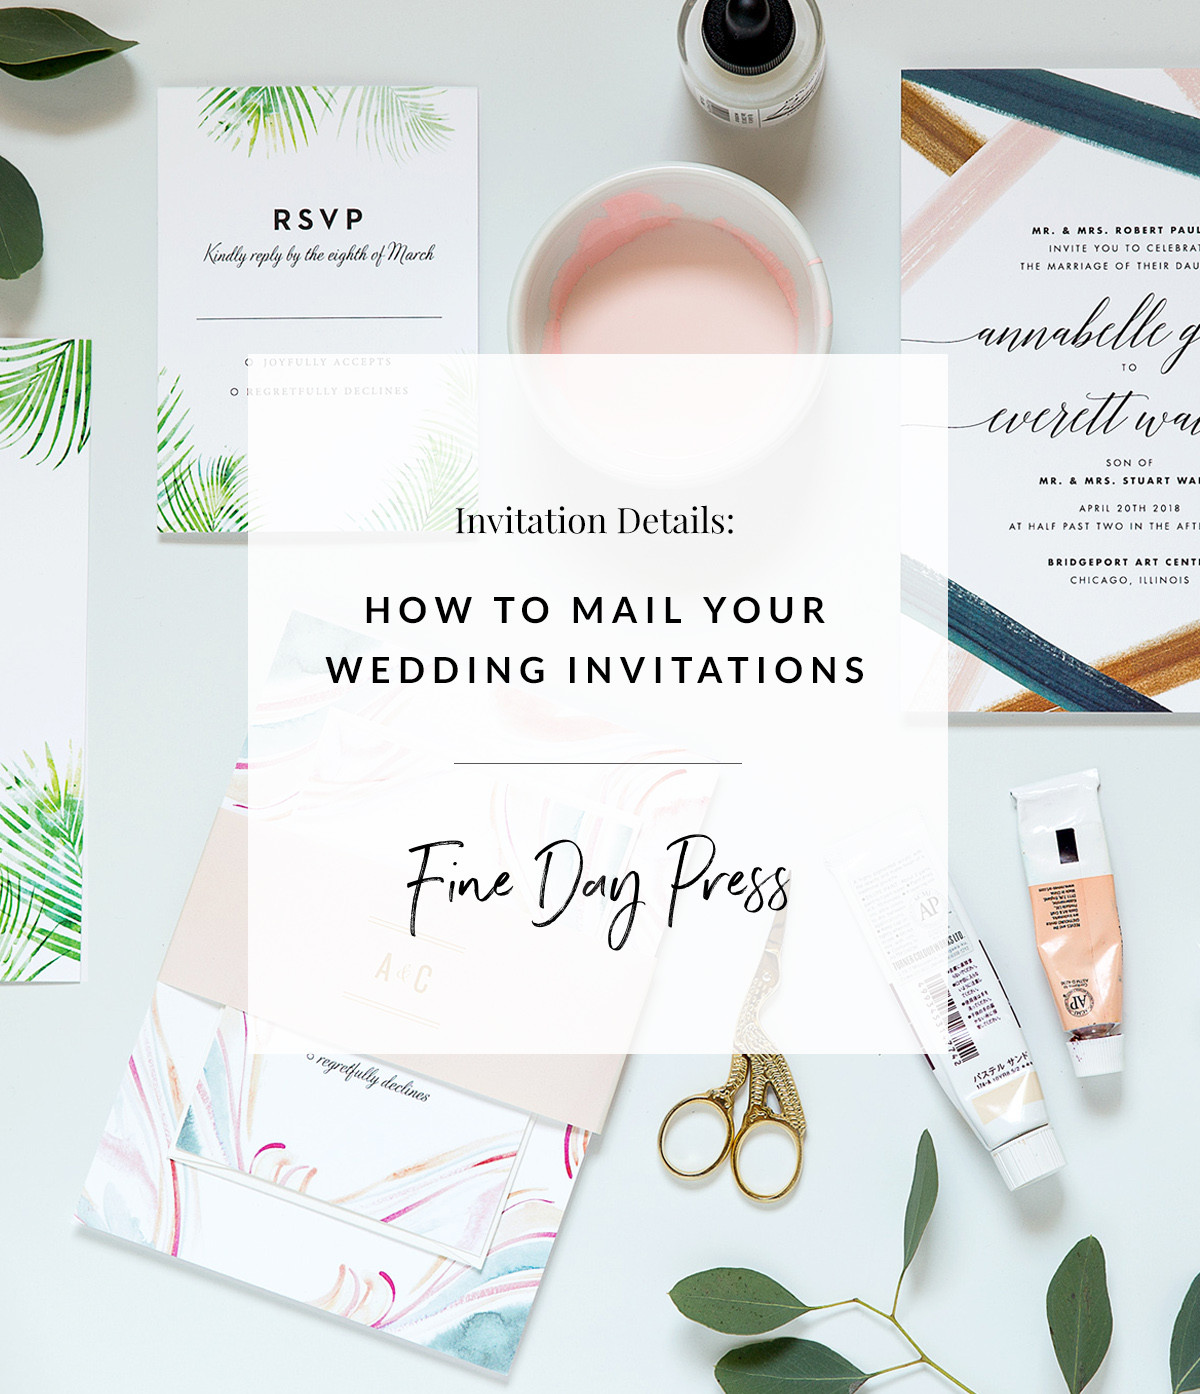 When To Mail Out Wedding Invitations
 How to Mail Wedding Invitations Fine Day Press